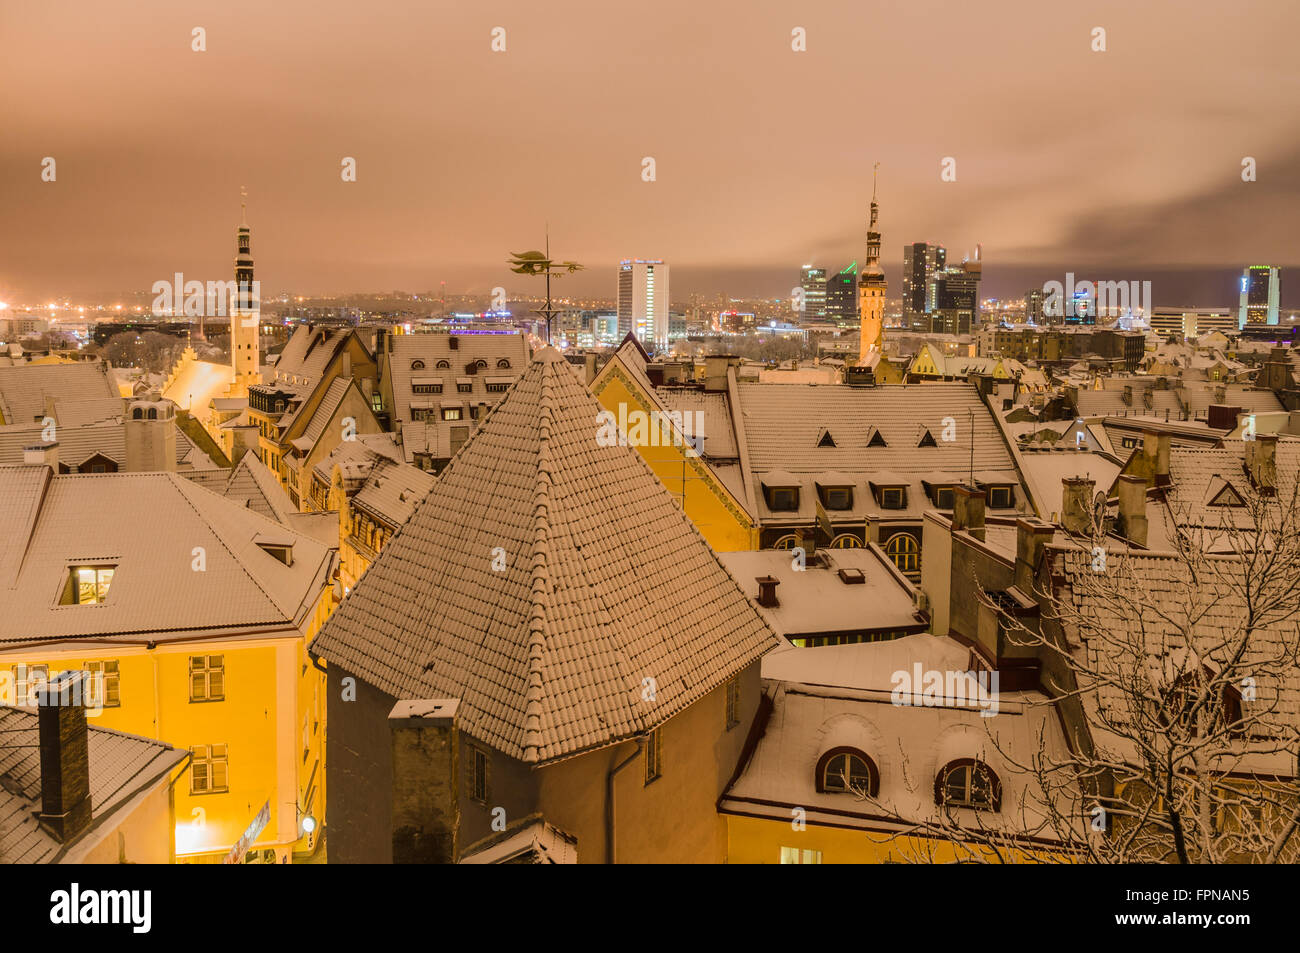 Winter time view on snowbound old town and modern city at night, Tallinn, Estonia Stock Photo